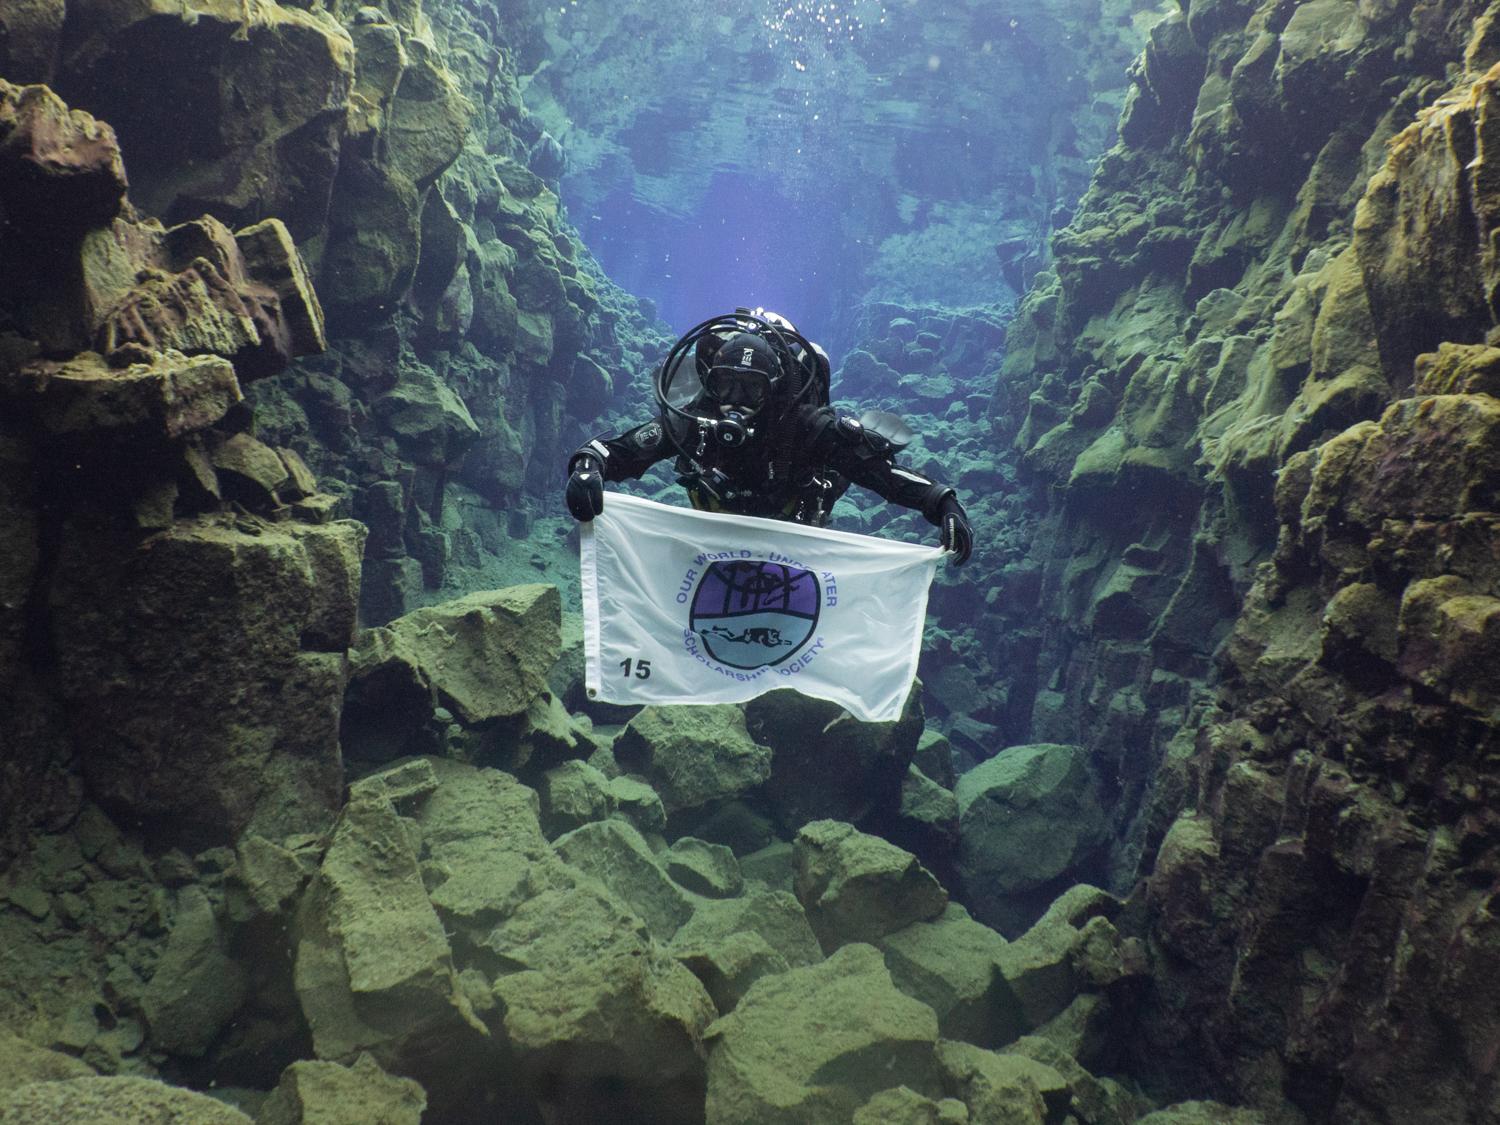 Diving Between Two Continents